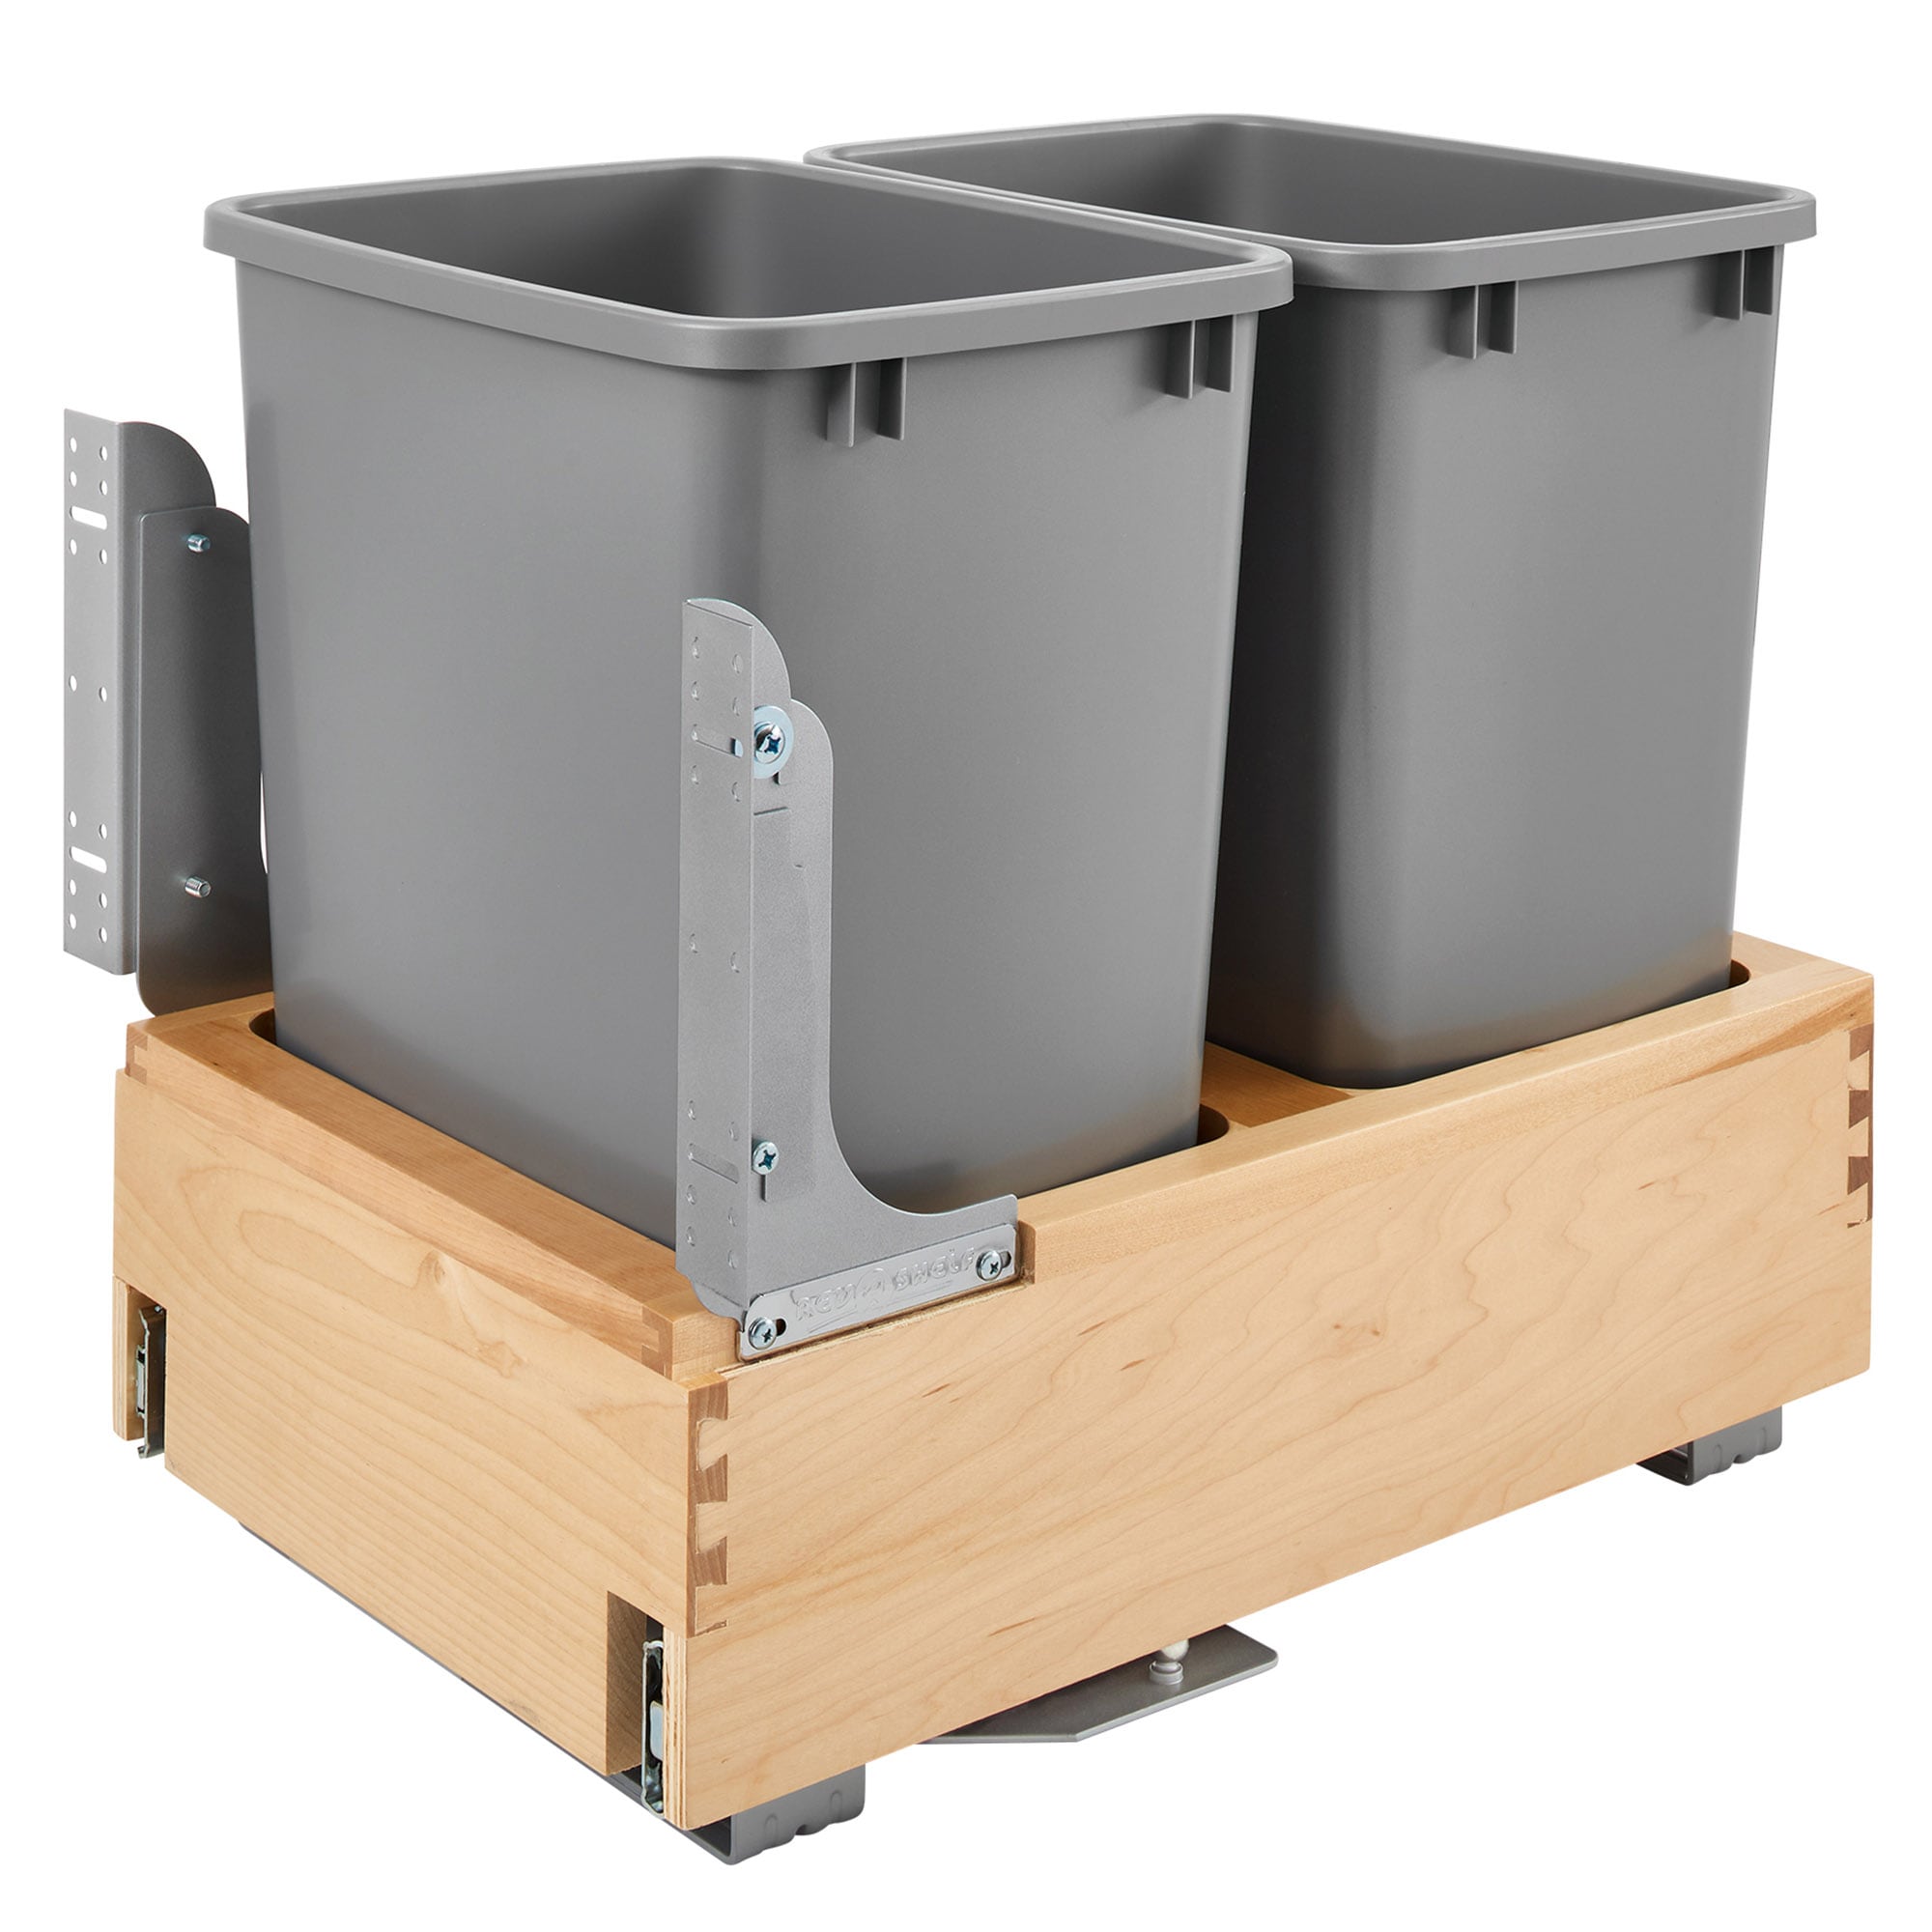 14 Quart Waste Basket Ideal for the Office